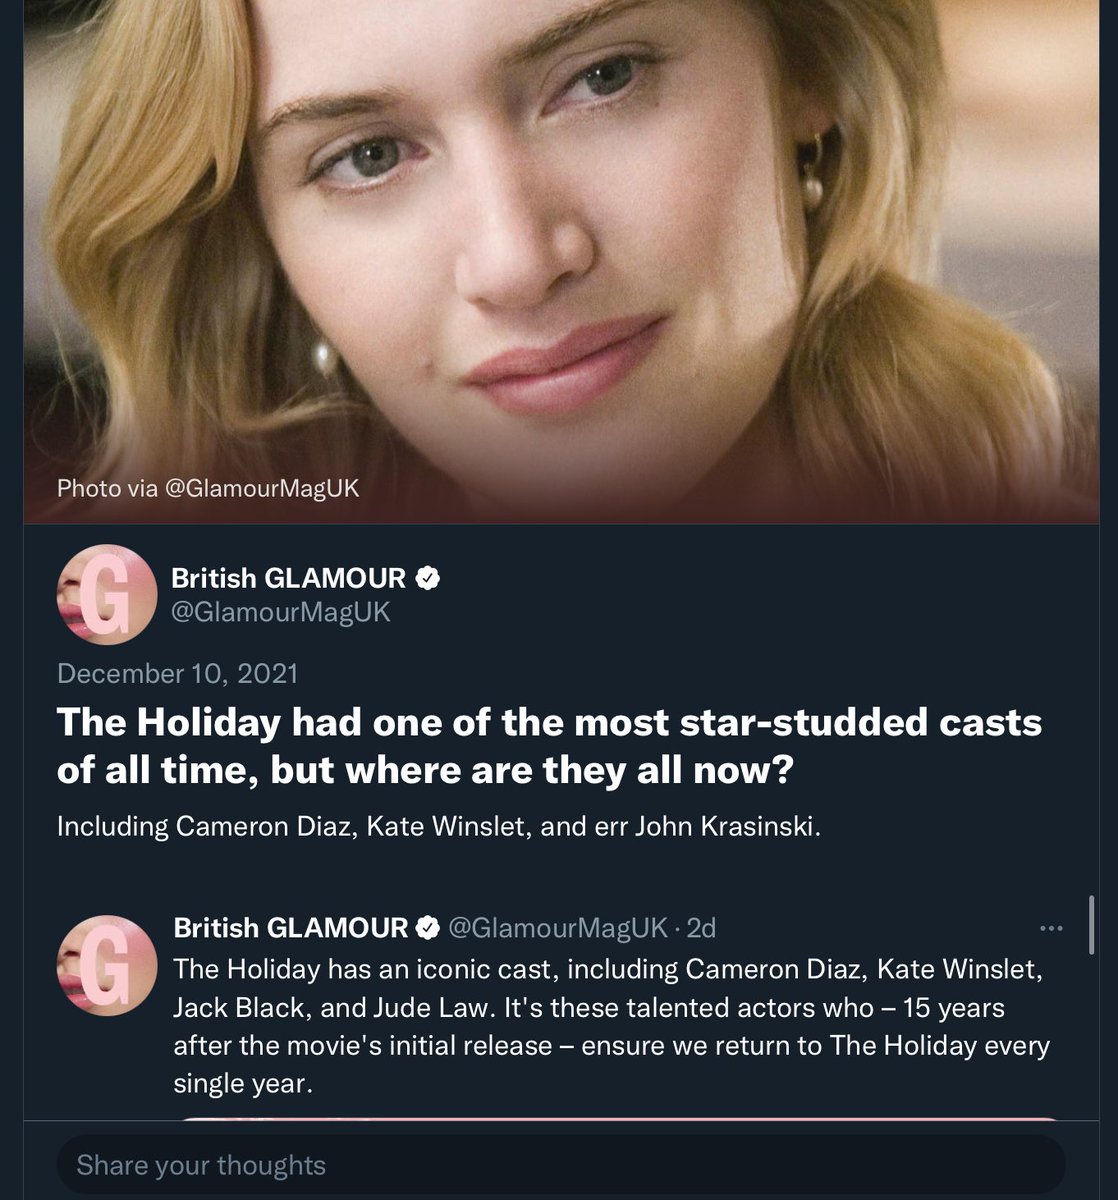 I mean yeah, I was really starting to worry about what and where Kate Winslet, Jack Black, Jude Law and Cameron Diaz were these days. Thank god someone’s managed to locate this mind blowing information for us. https://t.co/TFzgDb9Mpo